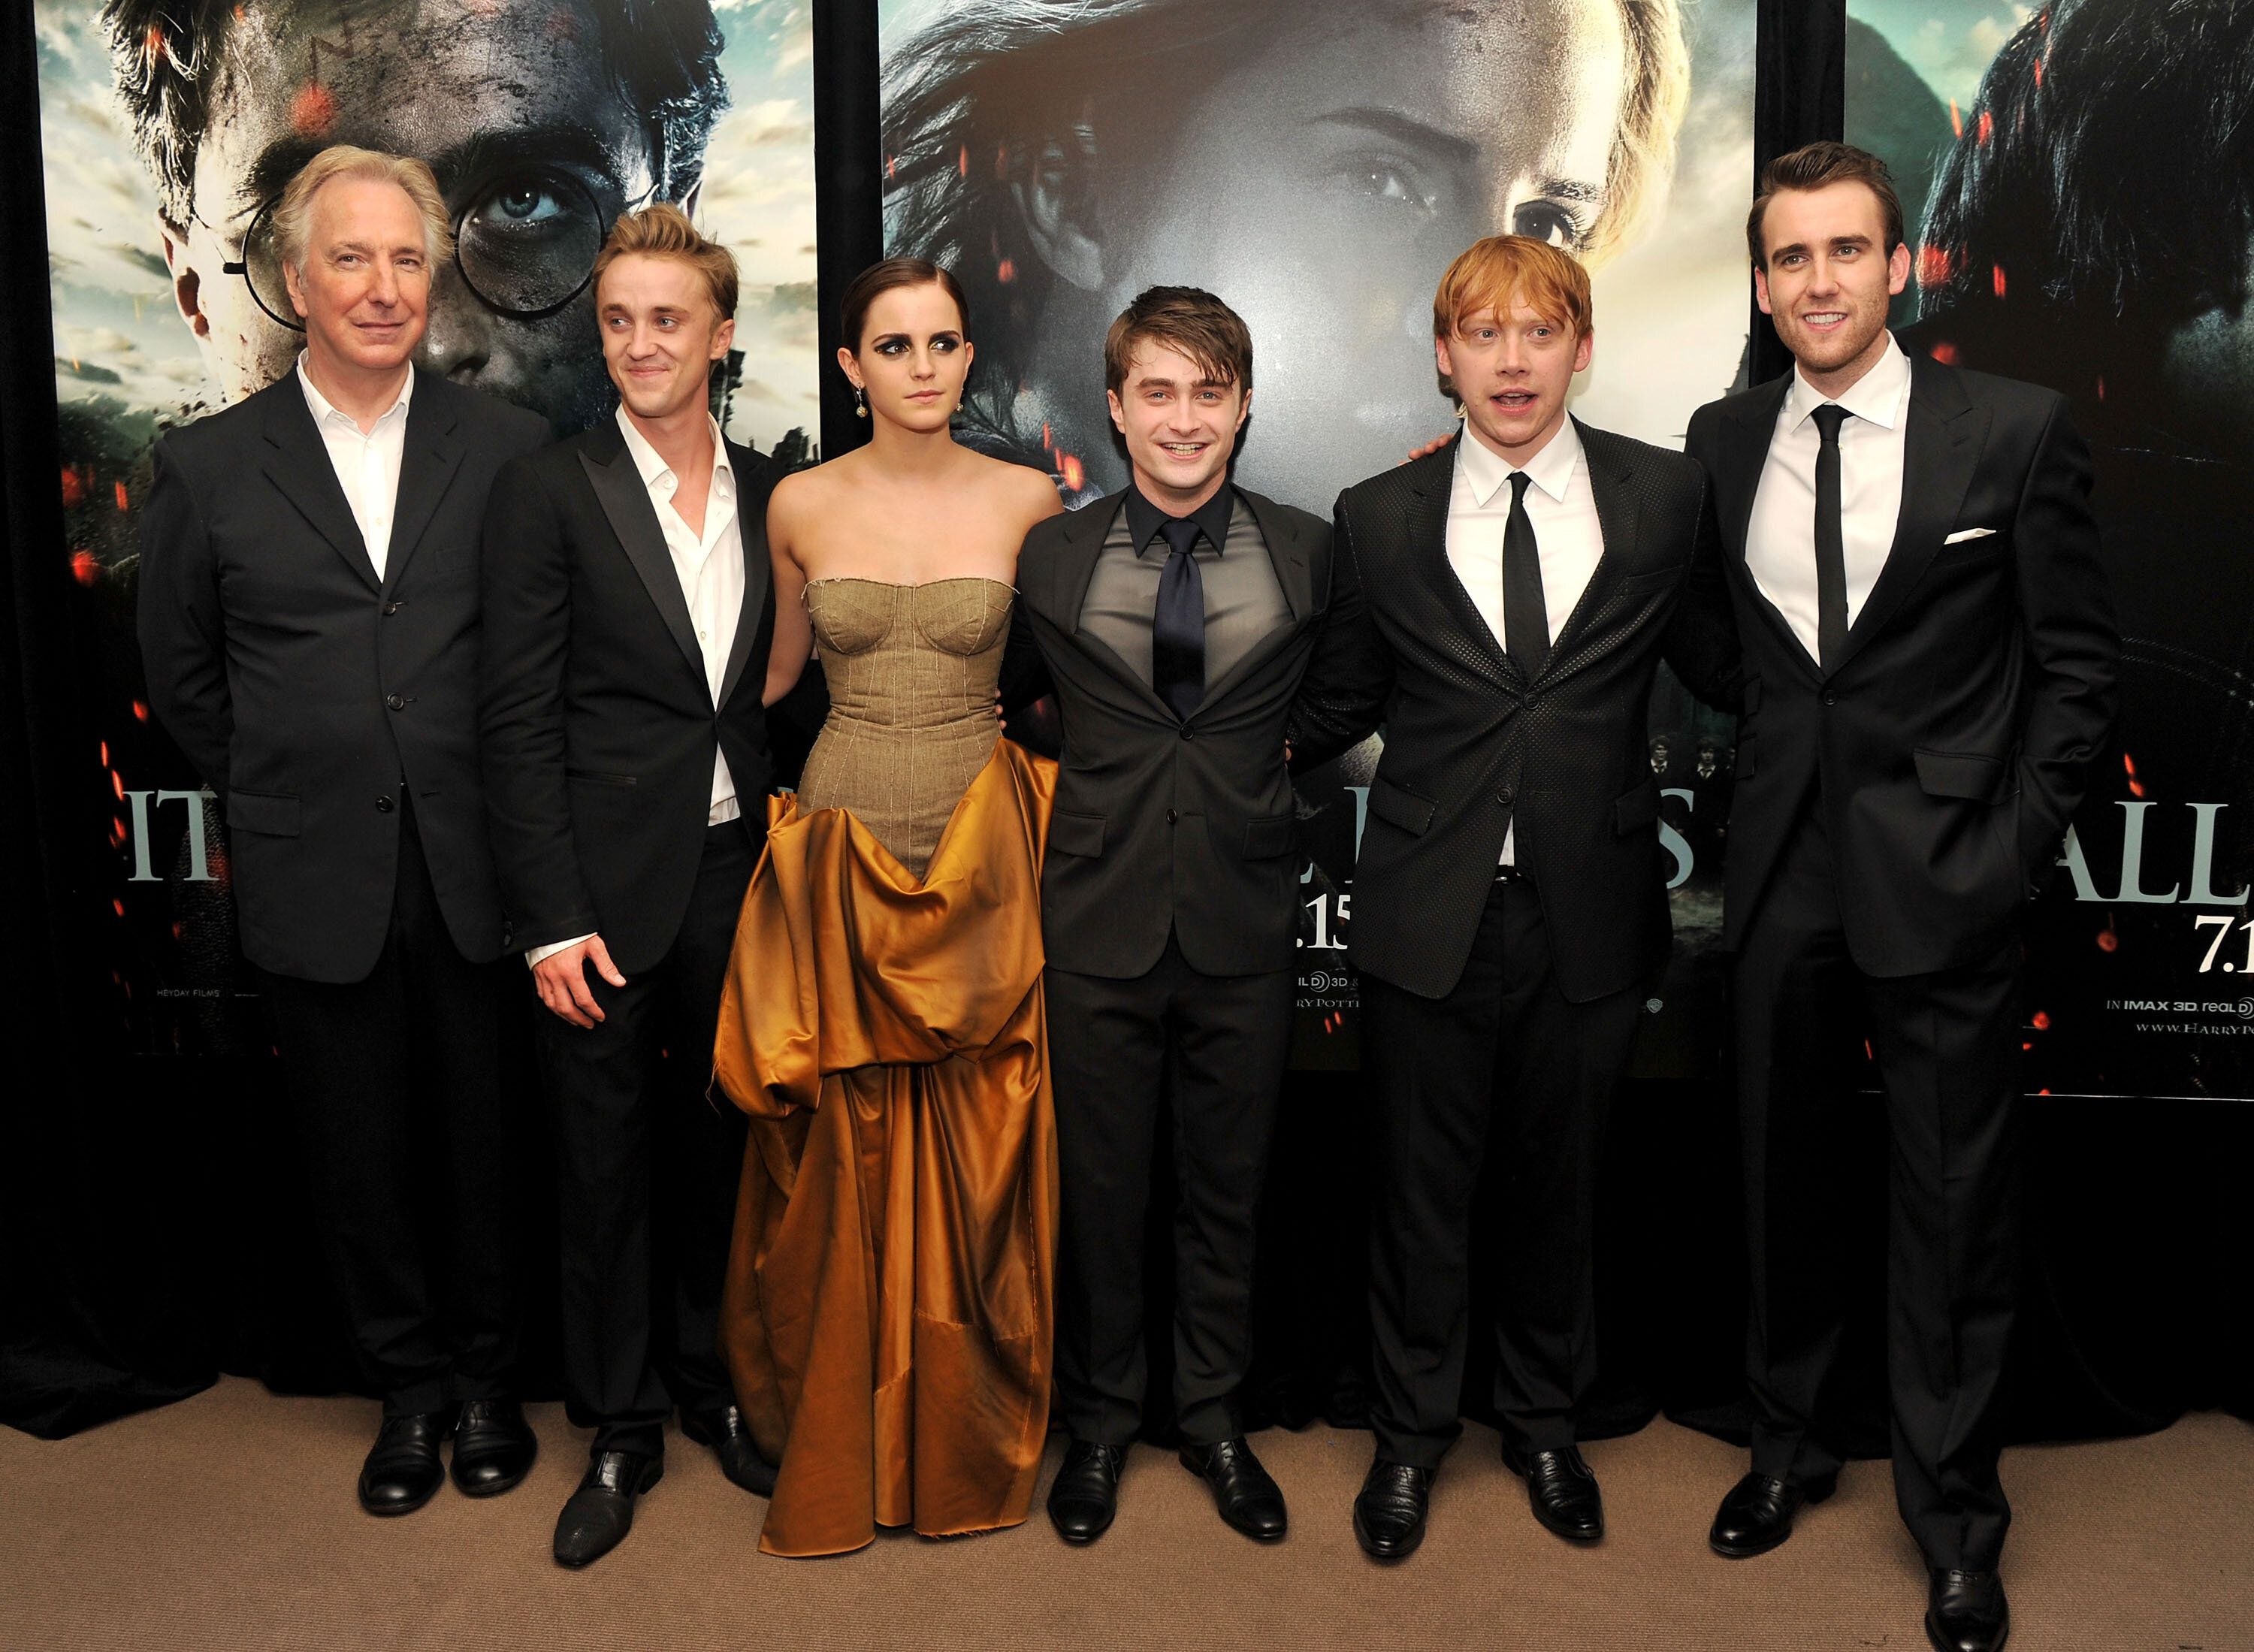 Alan Rickman, Tom Felton, Emma Watson, Daniel Radcliffe, Rupert Grint and Matthew Lewis attend the New York premiere of Harry Potter And The Deathly Hallows: Part 2 in 2011.